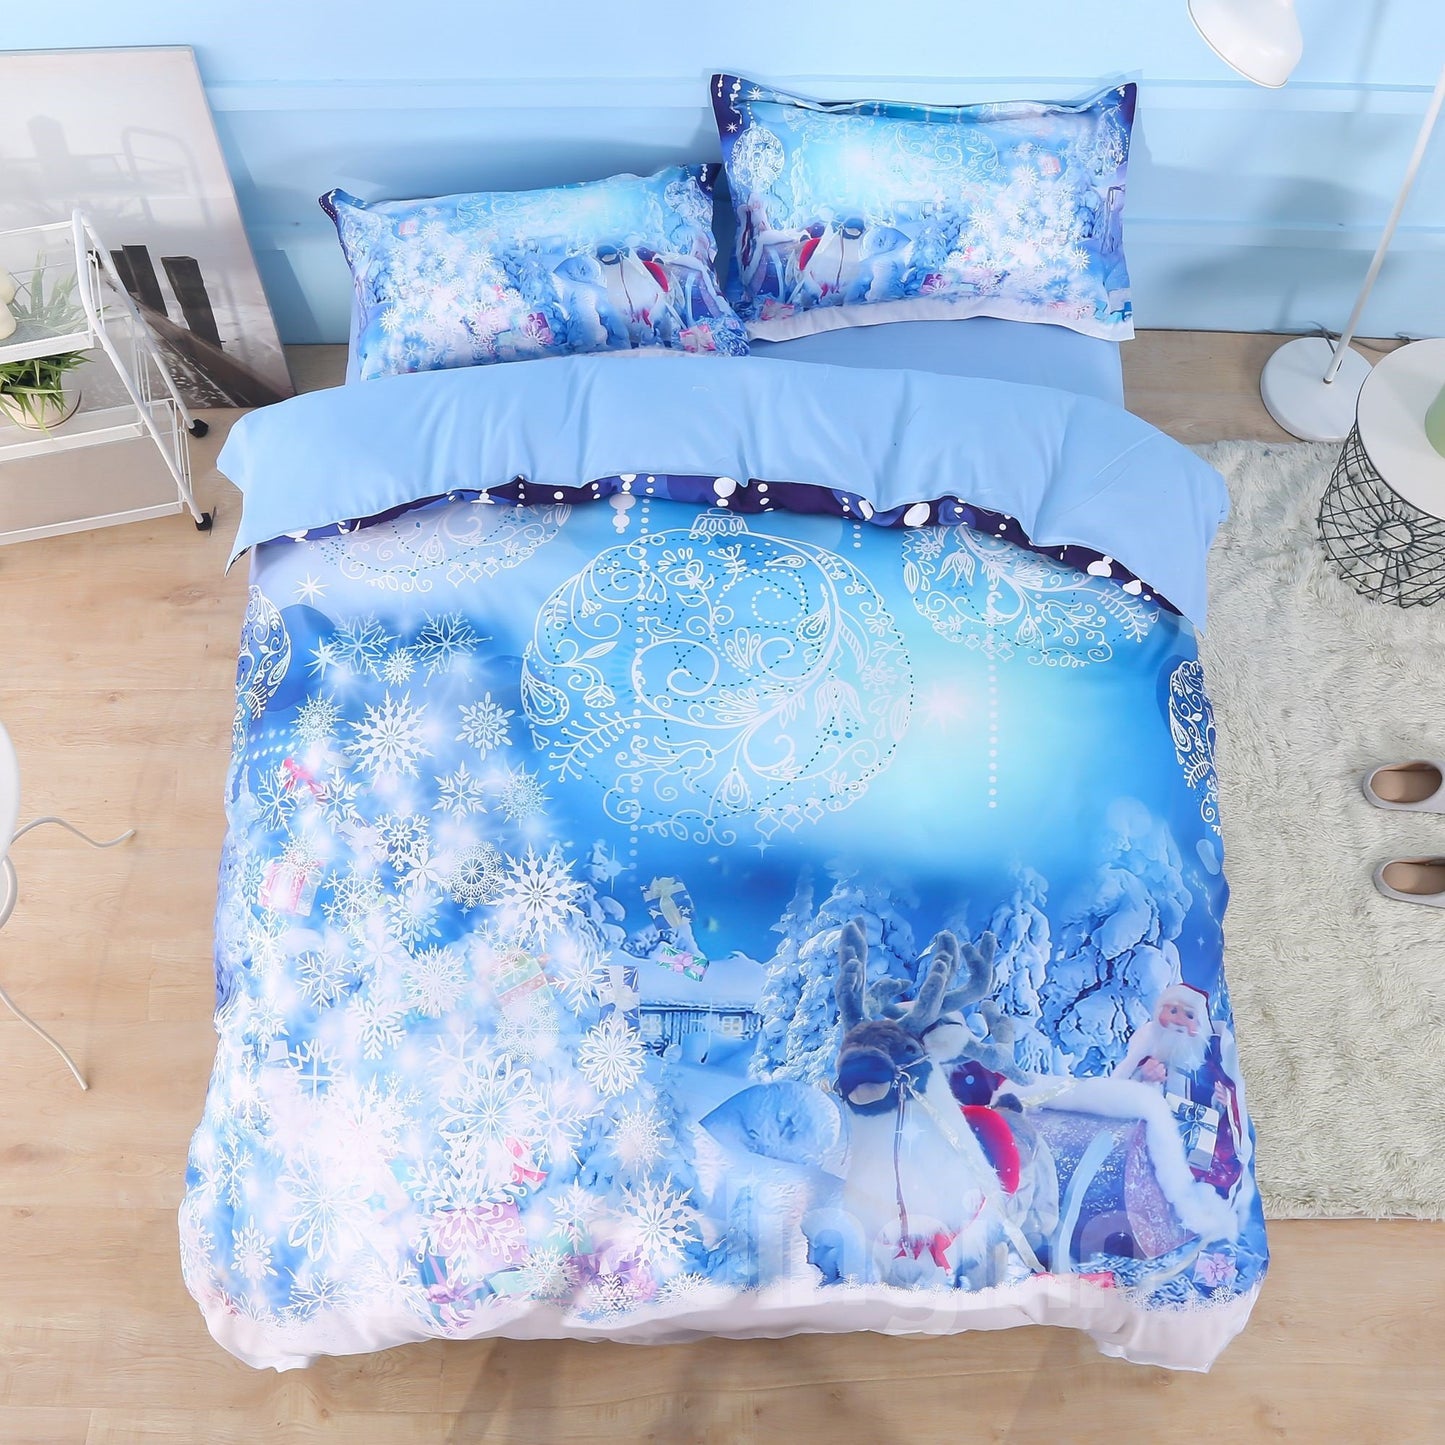 Free Shipping For Only $26.99 3D Christmas Bedding Santa Claus and Gifts Print Holiday 4-Piece Bedding Set Duvet Cover Set Microfiber(Clearance Bedding Set £¬no return or exchange)